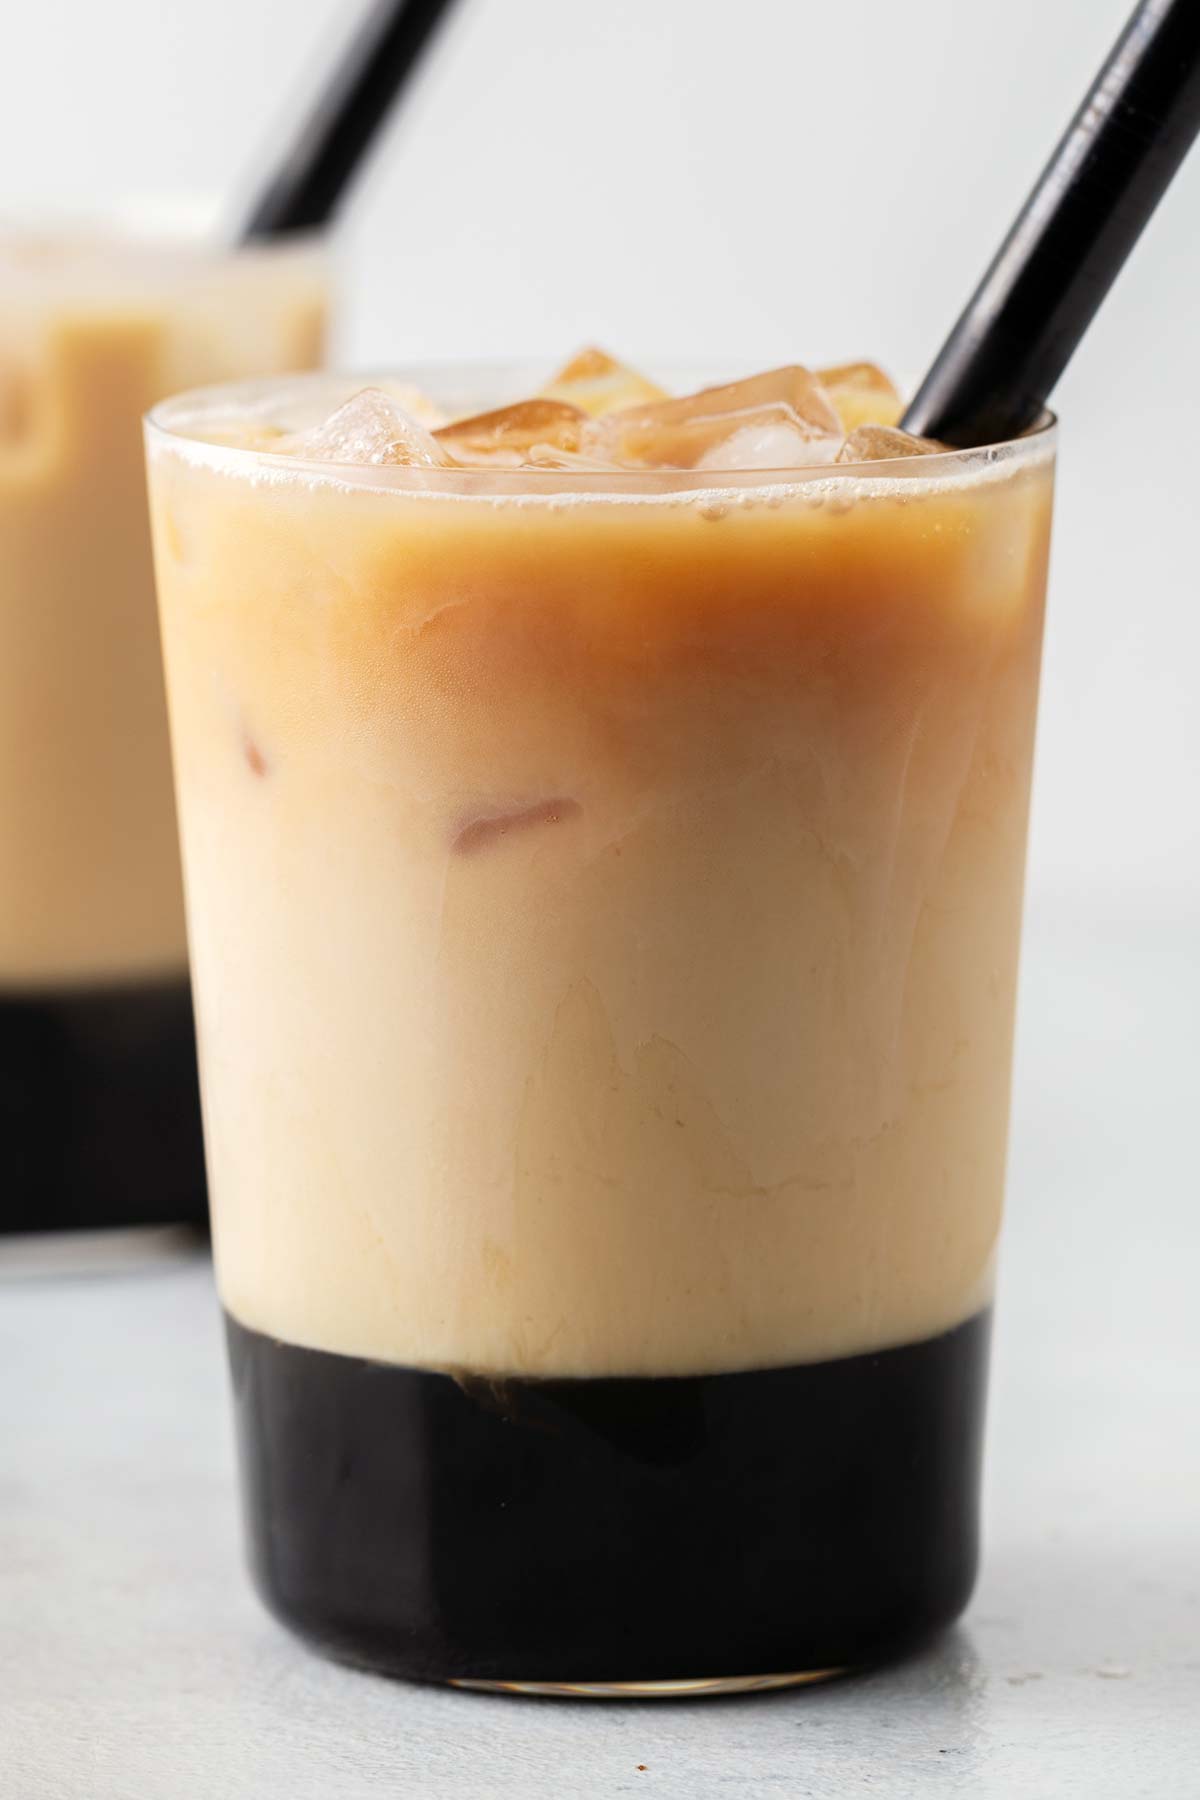 Rose Bubble Tea (Rose Milk Tea with Boba) finished and layered in a large glass with a black, wide straw.